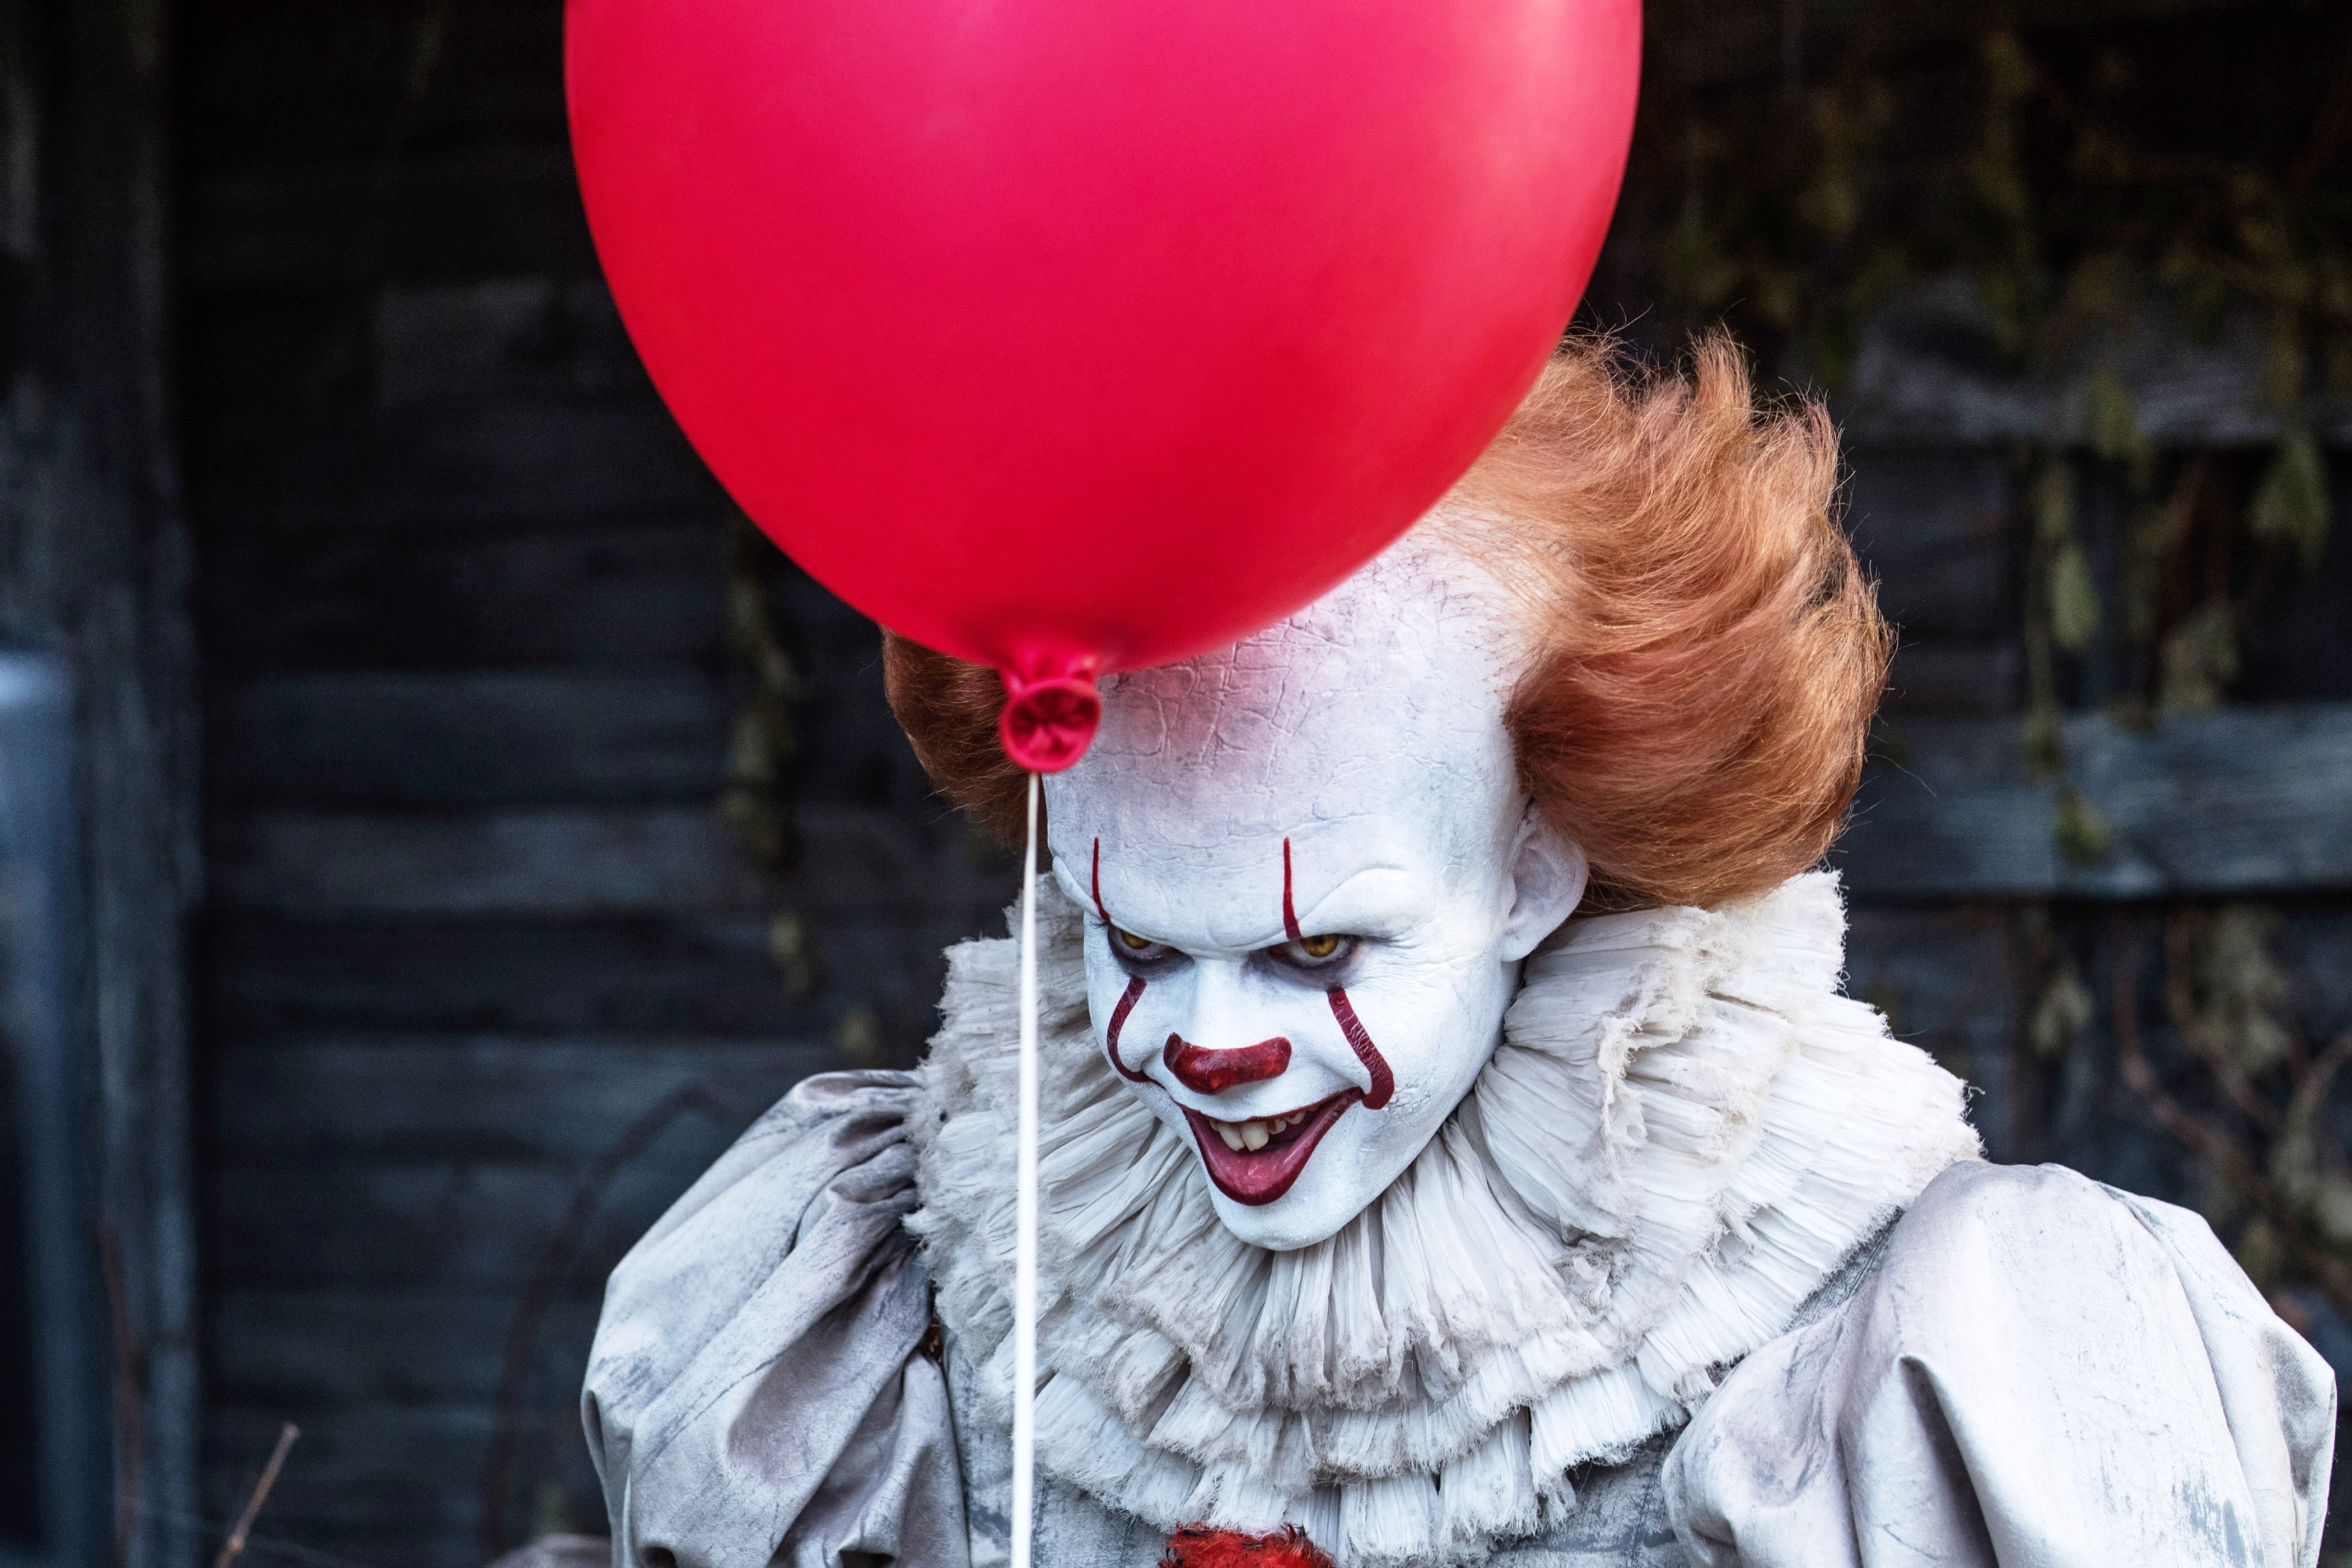 Bill Skarsgård Says ‘It’ Studio Was ‘Kind of Mean’ to Release First Pennywise Photo Before Filming as It Ignited Fan...